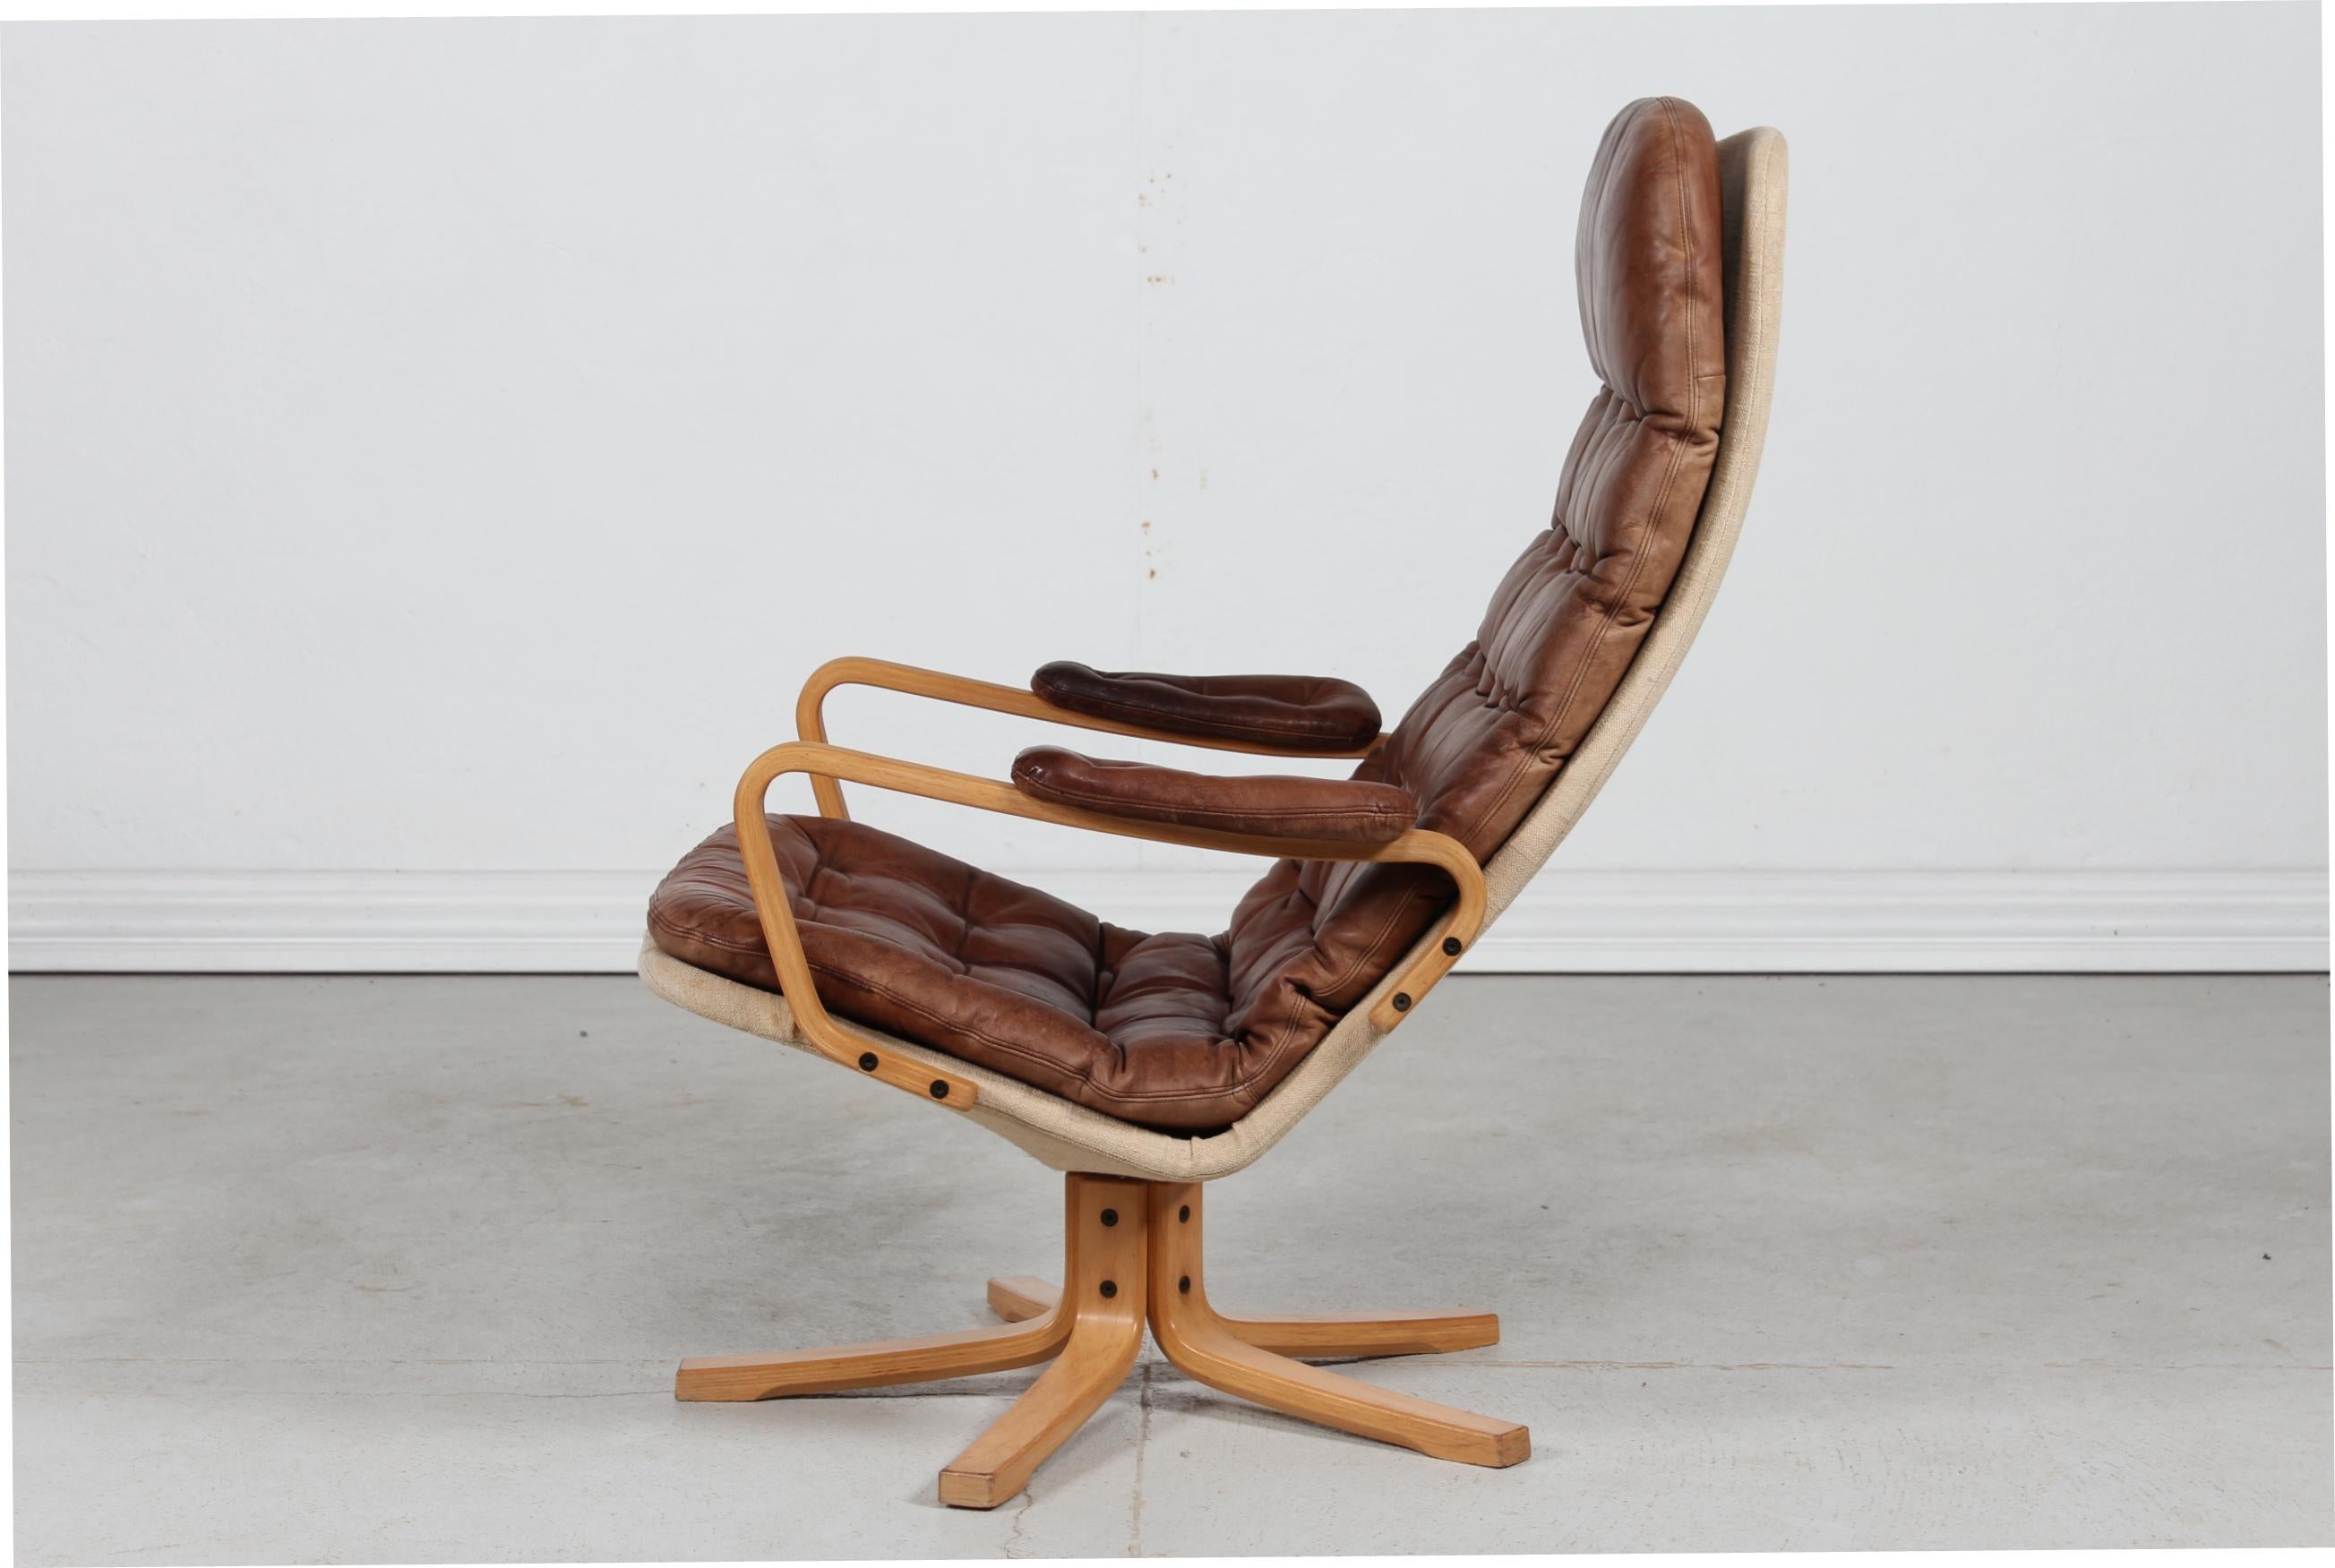 Swedish Sam Larsson Mona Roto Swivel Chair Beech and Cognac Colored Leather 1970 In Good Condition For Sale In Aarhus C, DK